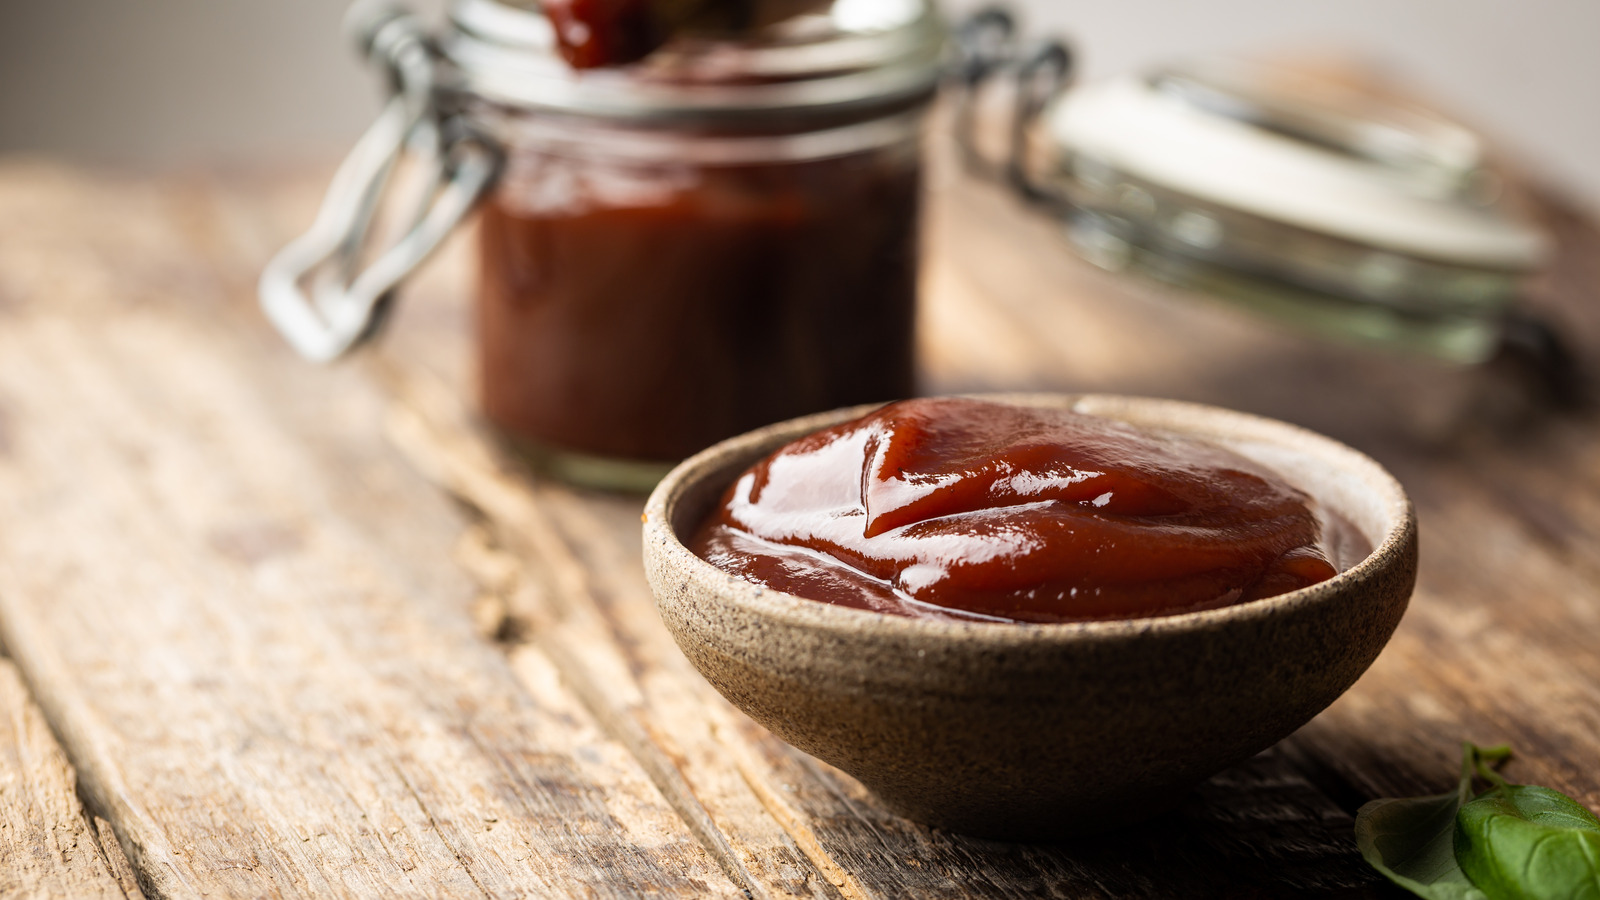 Instagram Is Singing The Praises Of Aldi's BBQ Sauces - Mashed